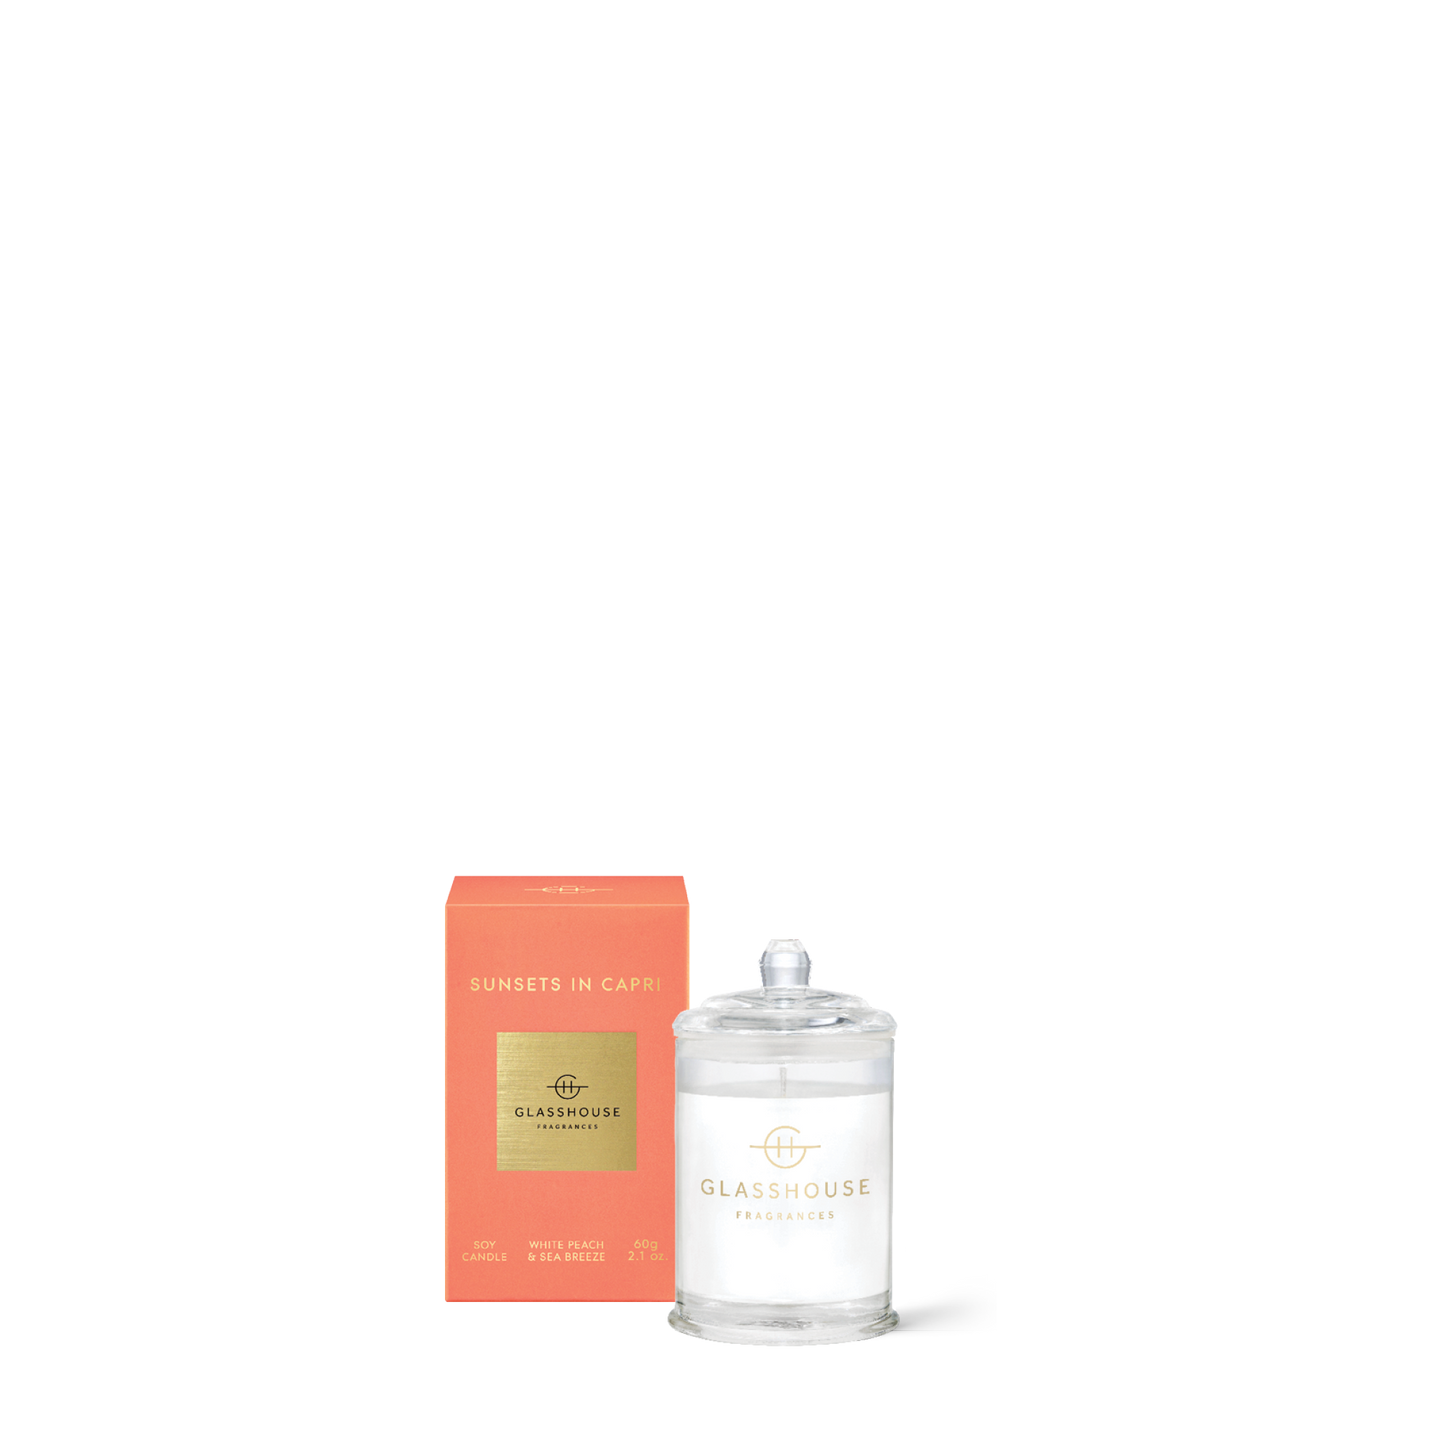 Sunsets In Capri - White Peach & Sea Breeze | 60g Soy Candle